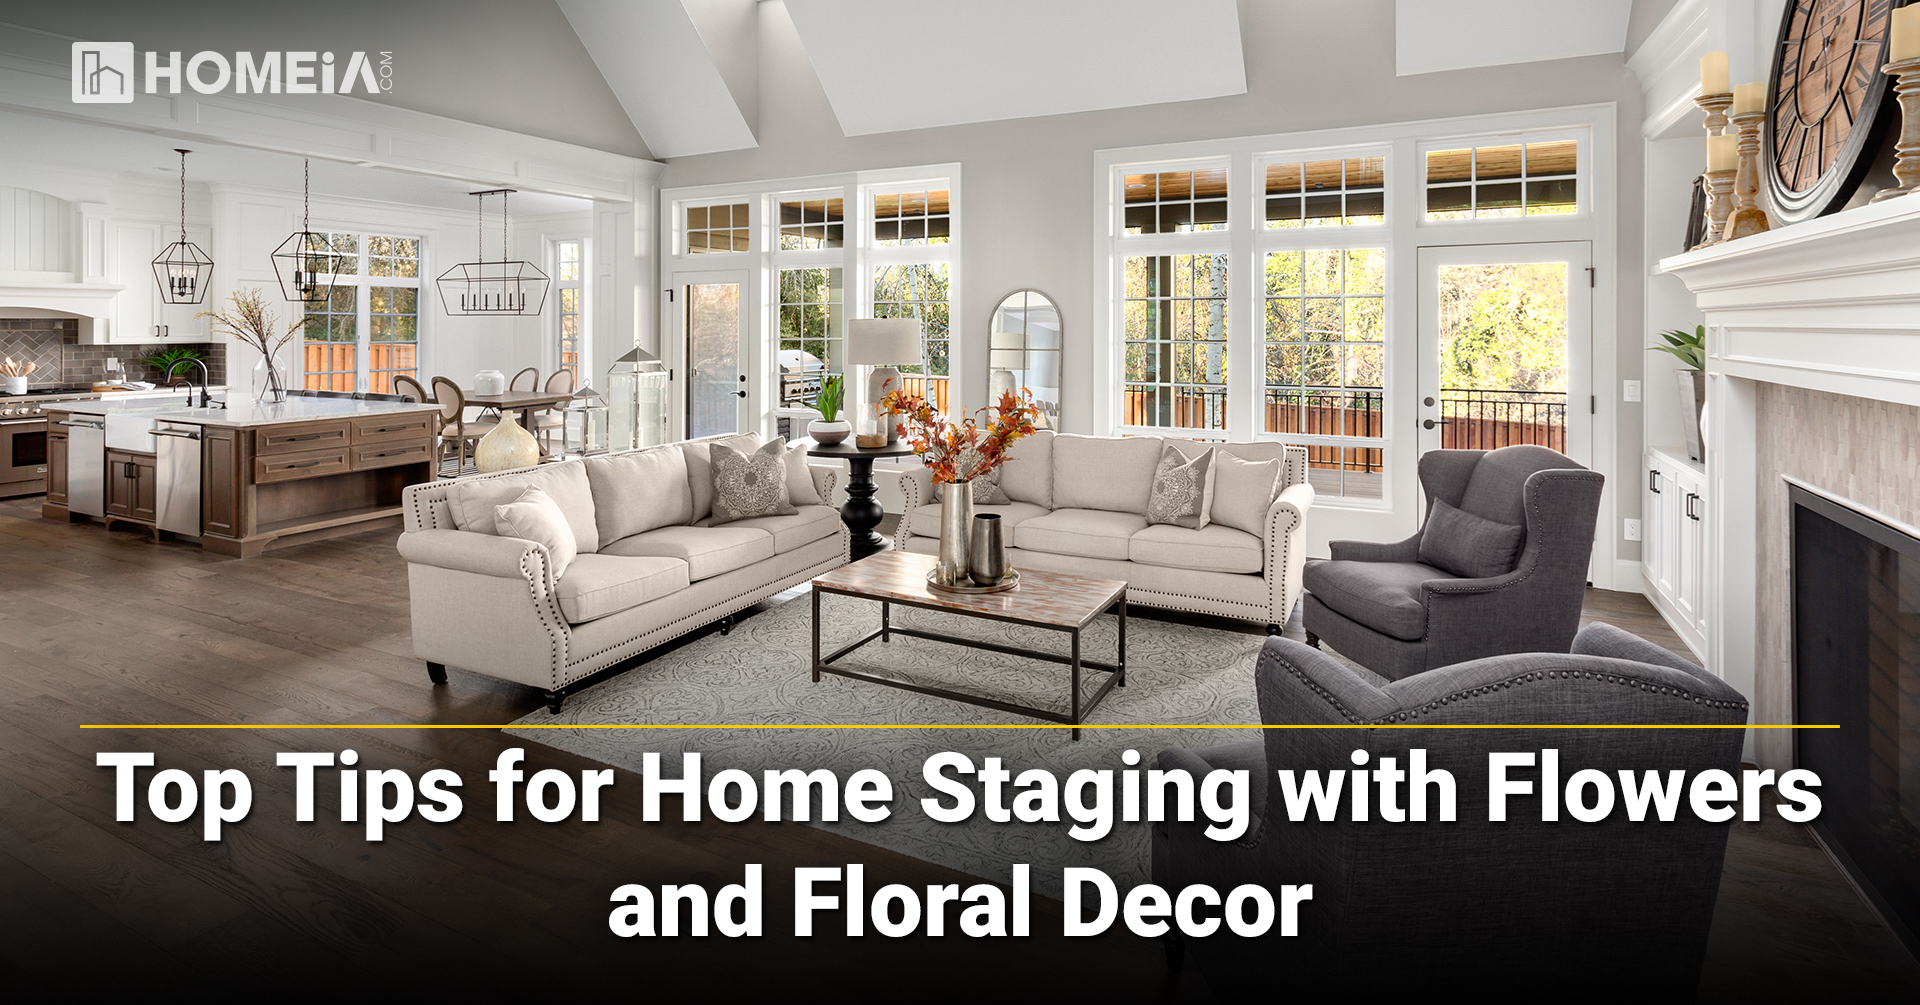 The 6 Tips for Home Staging with Flowers and Floral Decor